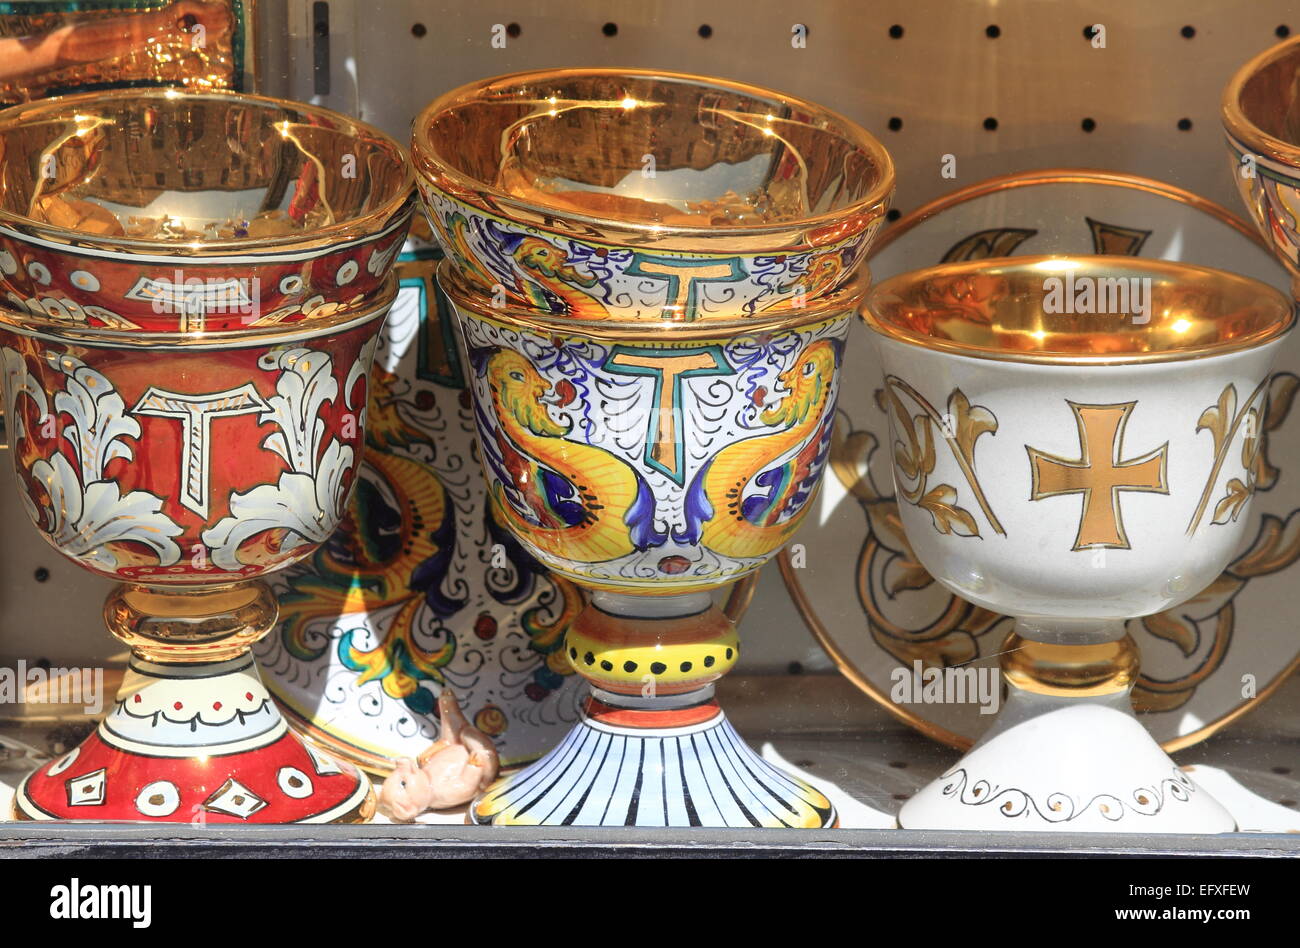 Holy chalices used for christian blessing ceremonies Stock Photo